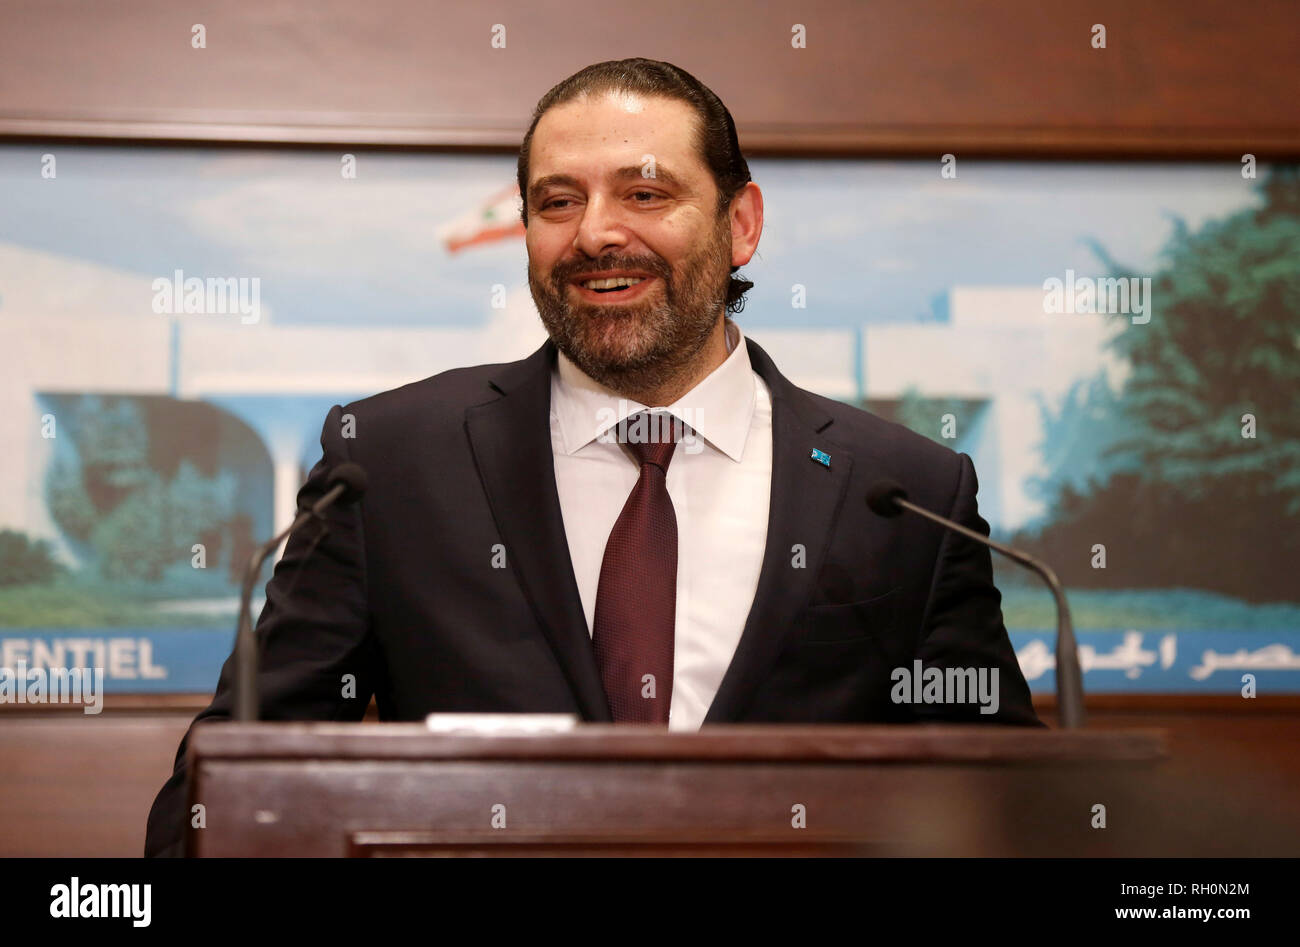 Beirut, Lebanon. 31st Jan, 2019. Lebanese Prime Minister Saad Hariri speaks at a press conference in Beirut, Lebanon, Jan. 31, 2019. Lebanon announced Thursday the formation of a new government, which is headed by Prime Minister Saad Hariri, breaking a nine-month political deadlock in the country, local TV Channel LBCI reported. Credit: Bilal Jawich/Xinhua/Alamy Live News Stock Photo